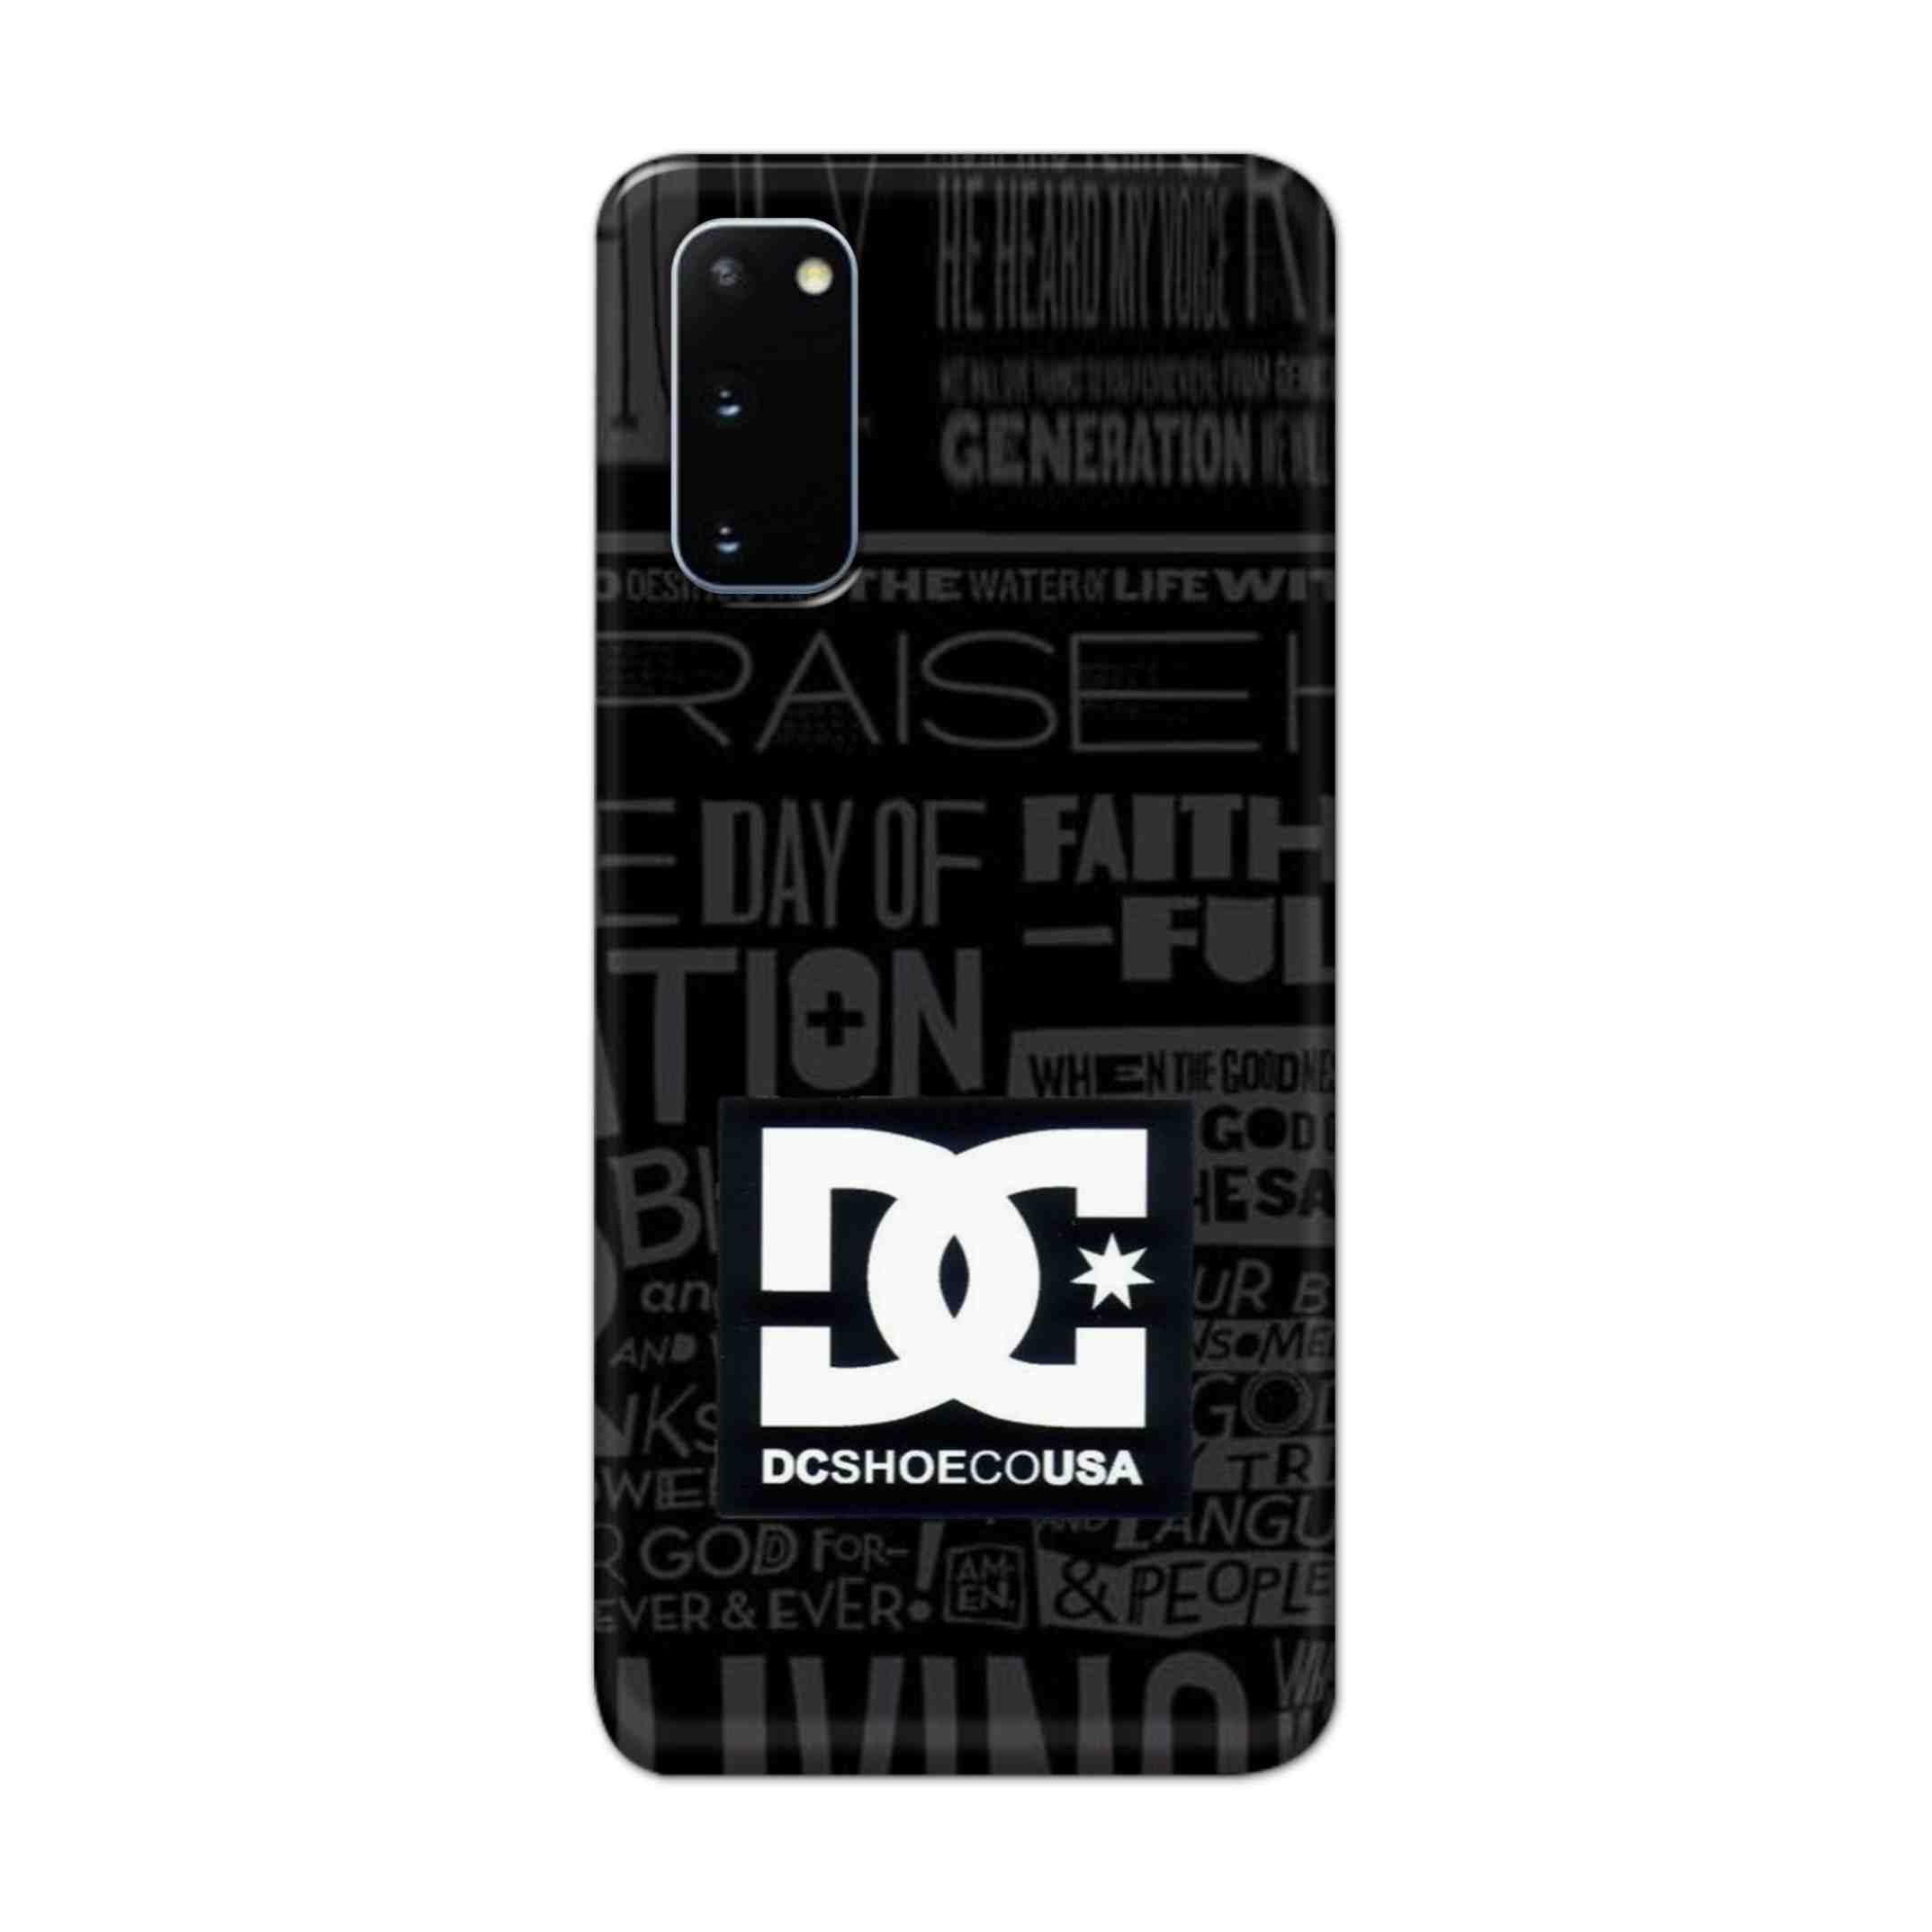 Buy Dc Shoecousa Hard Back Mobile Phone Case Cover For Samsung Galaxy S20 Online